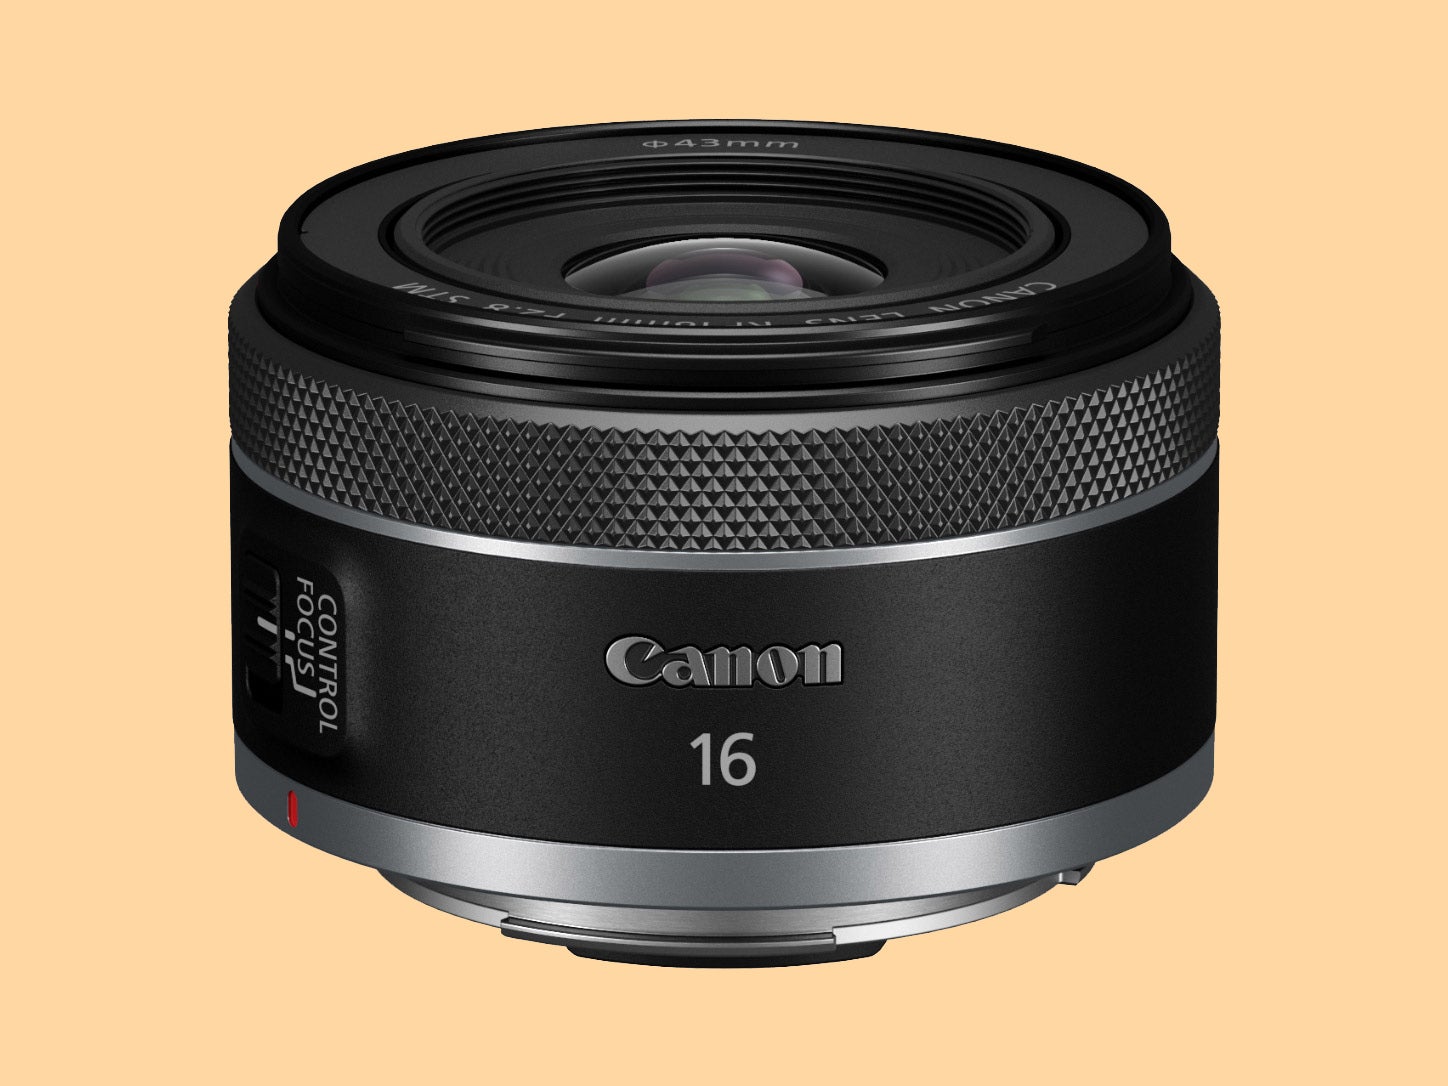 Canon RF 16mm f/2.8 and RF 100-400mm f/5.6-8 lenses announced 